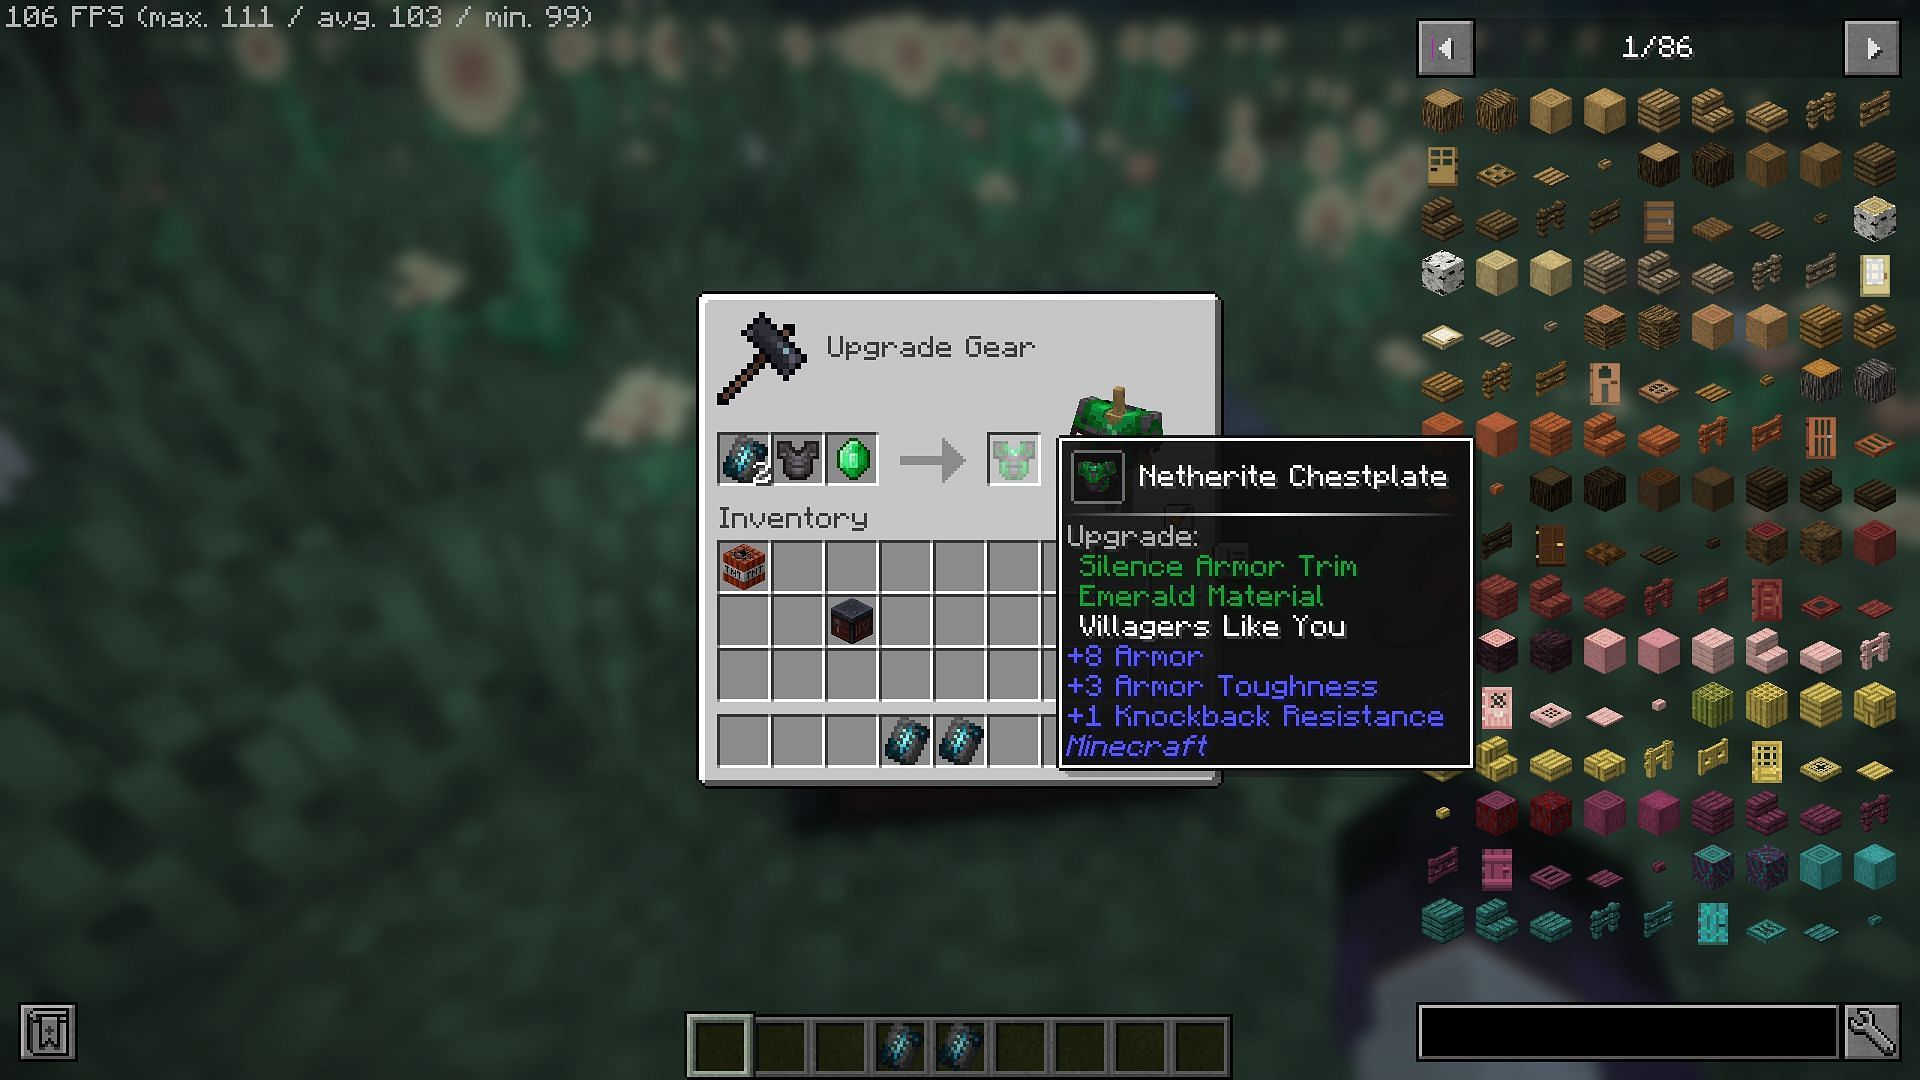 There are tooltips to hint at the different trim effects (Image via Mojang)